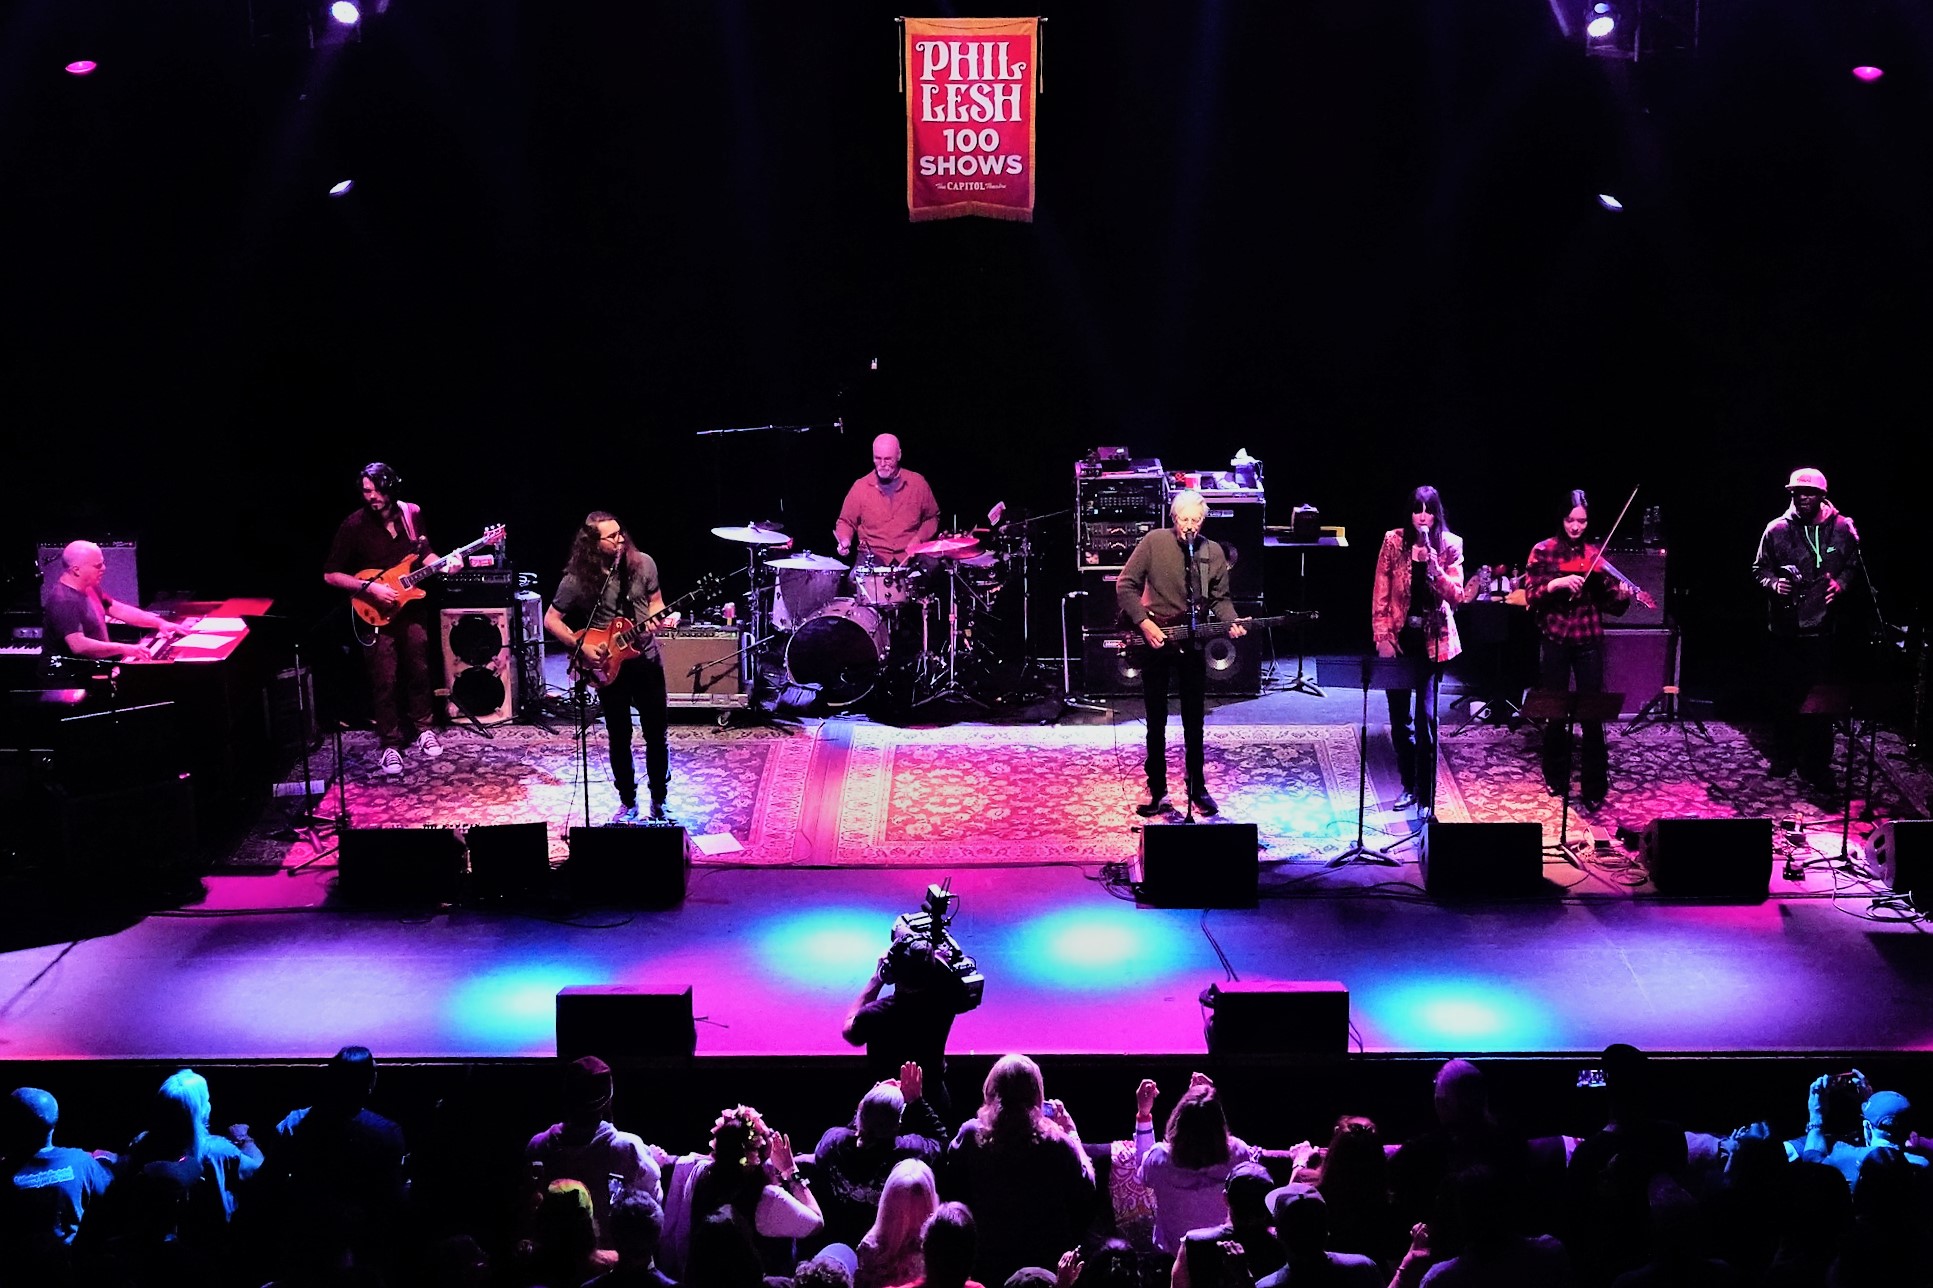 Phil Lesh & Friends 100th show at the Capitol Theatre